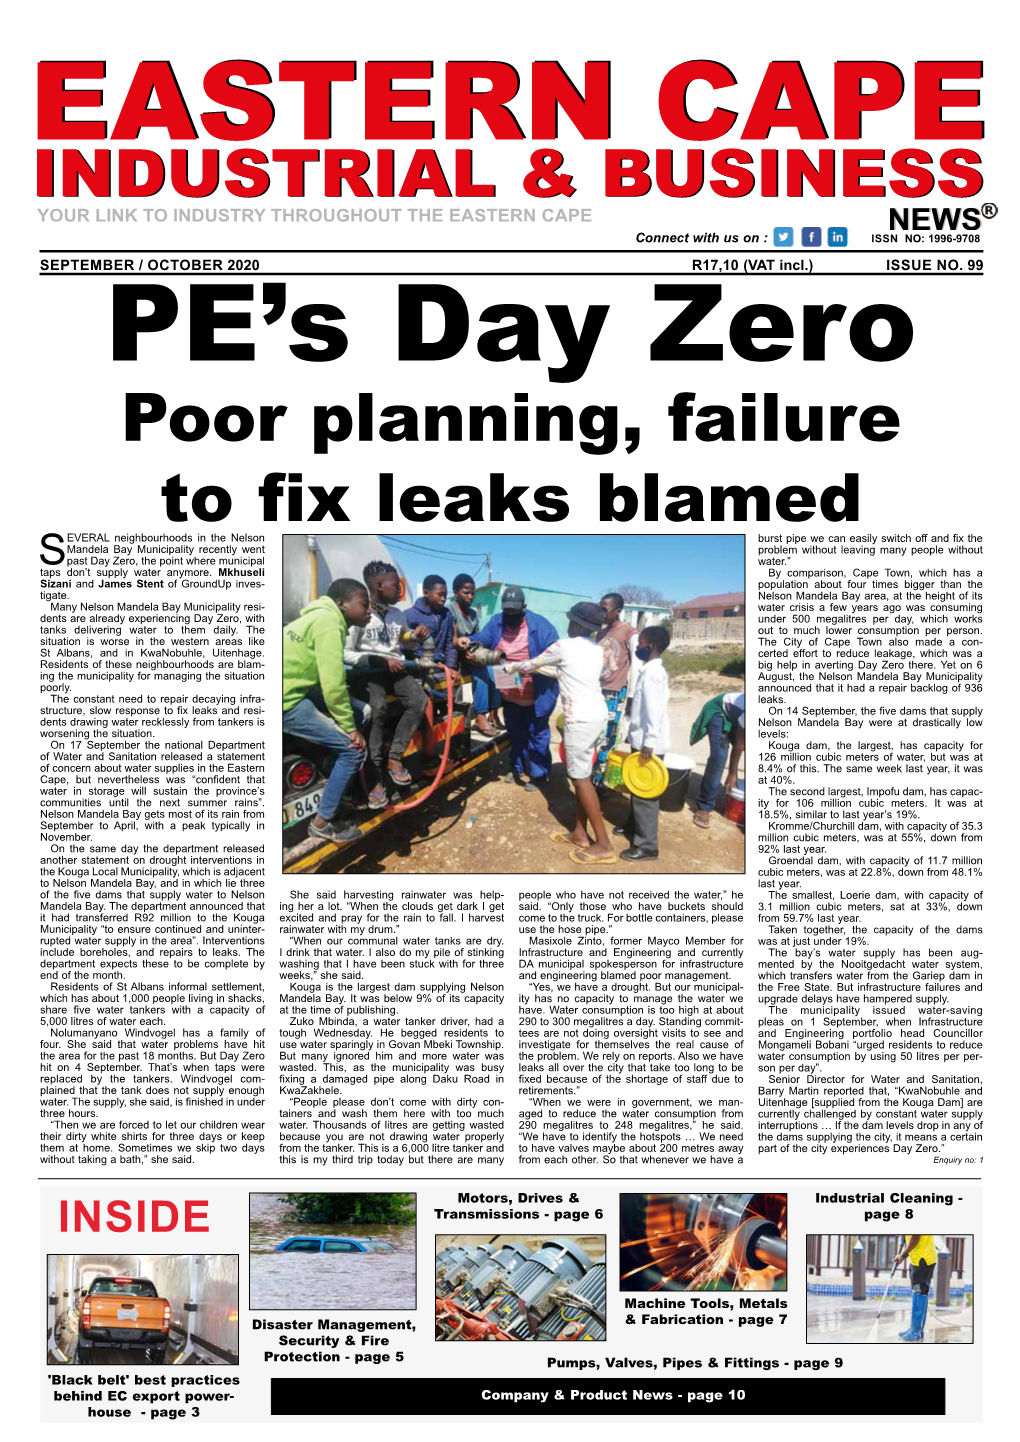 Poor Planning, Failure to Fix Leaks Blamed